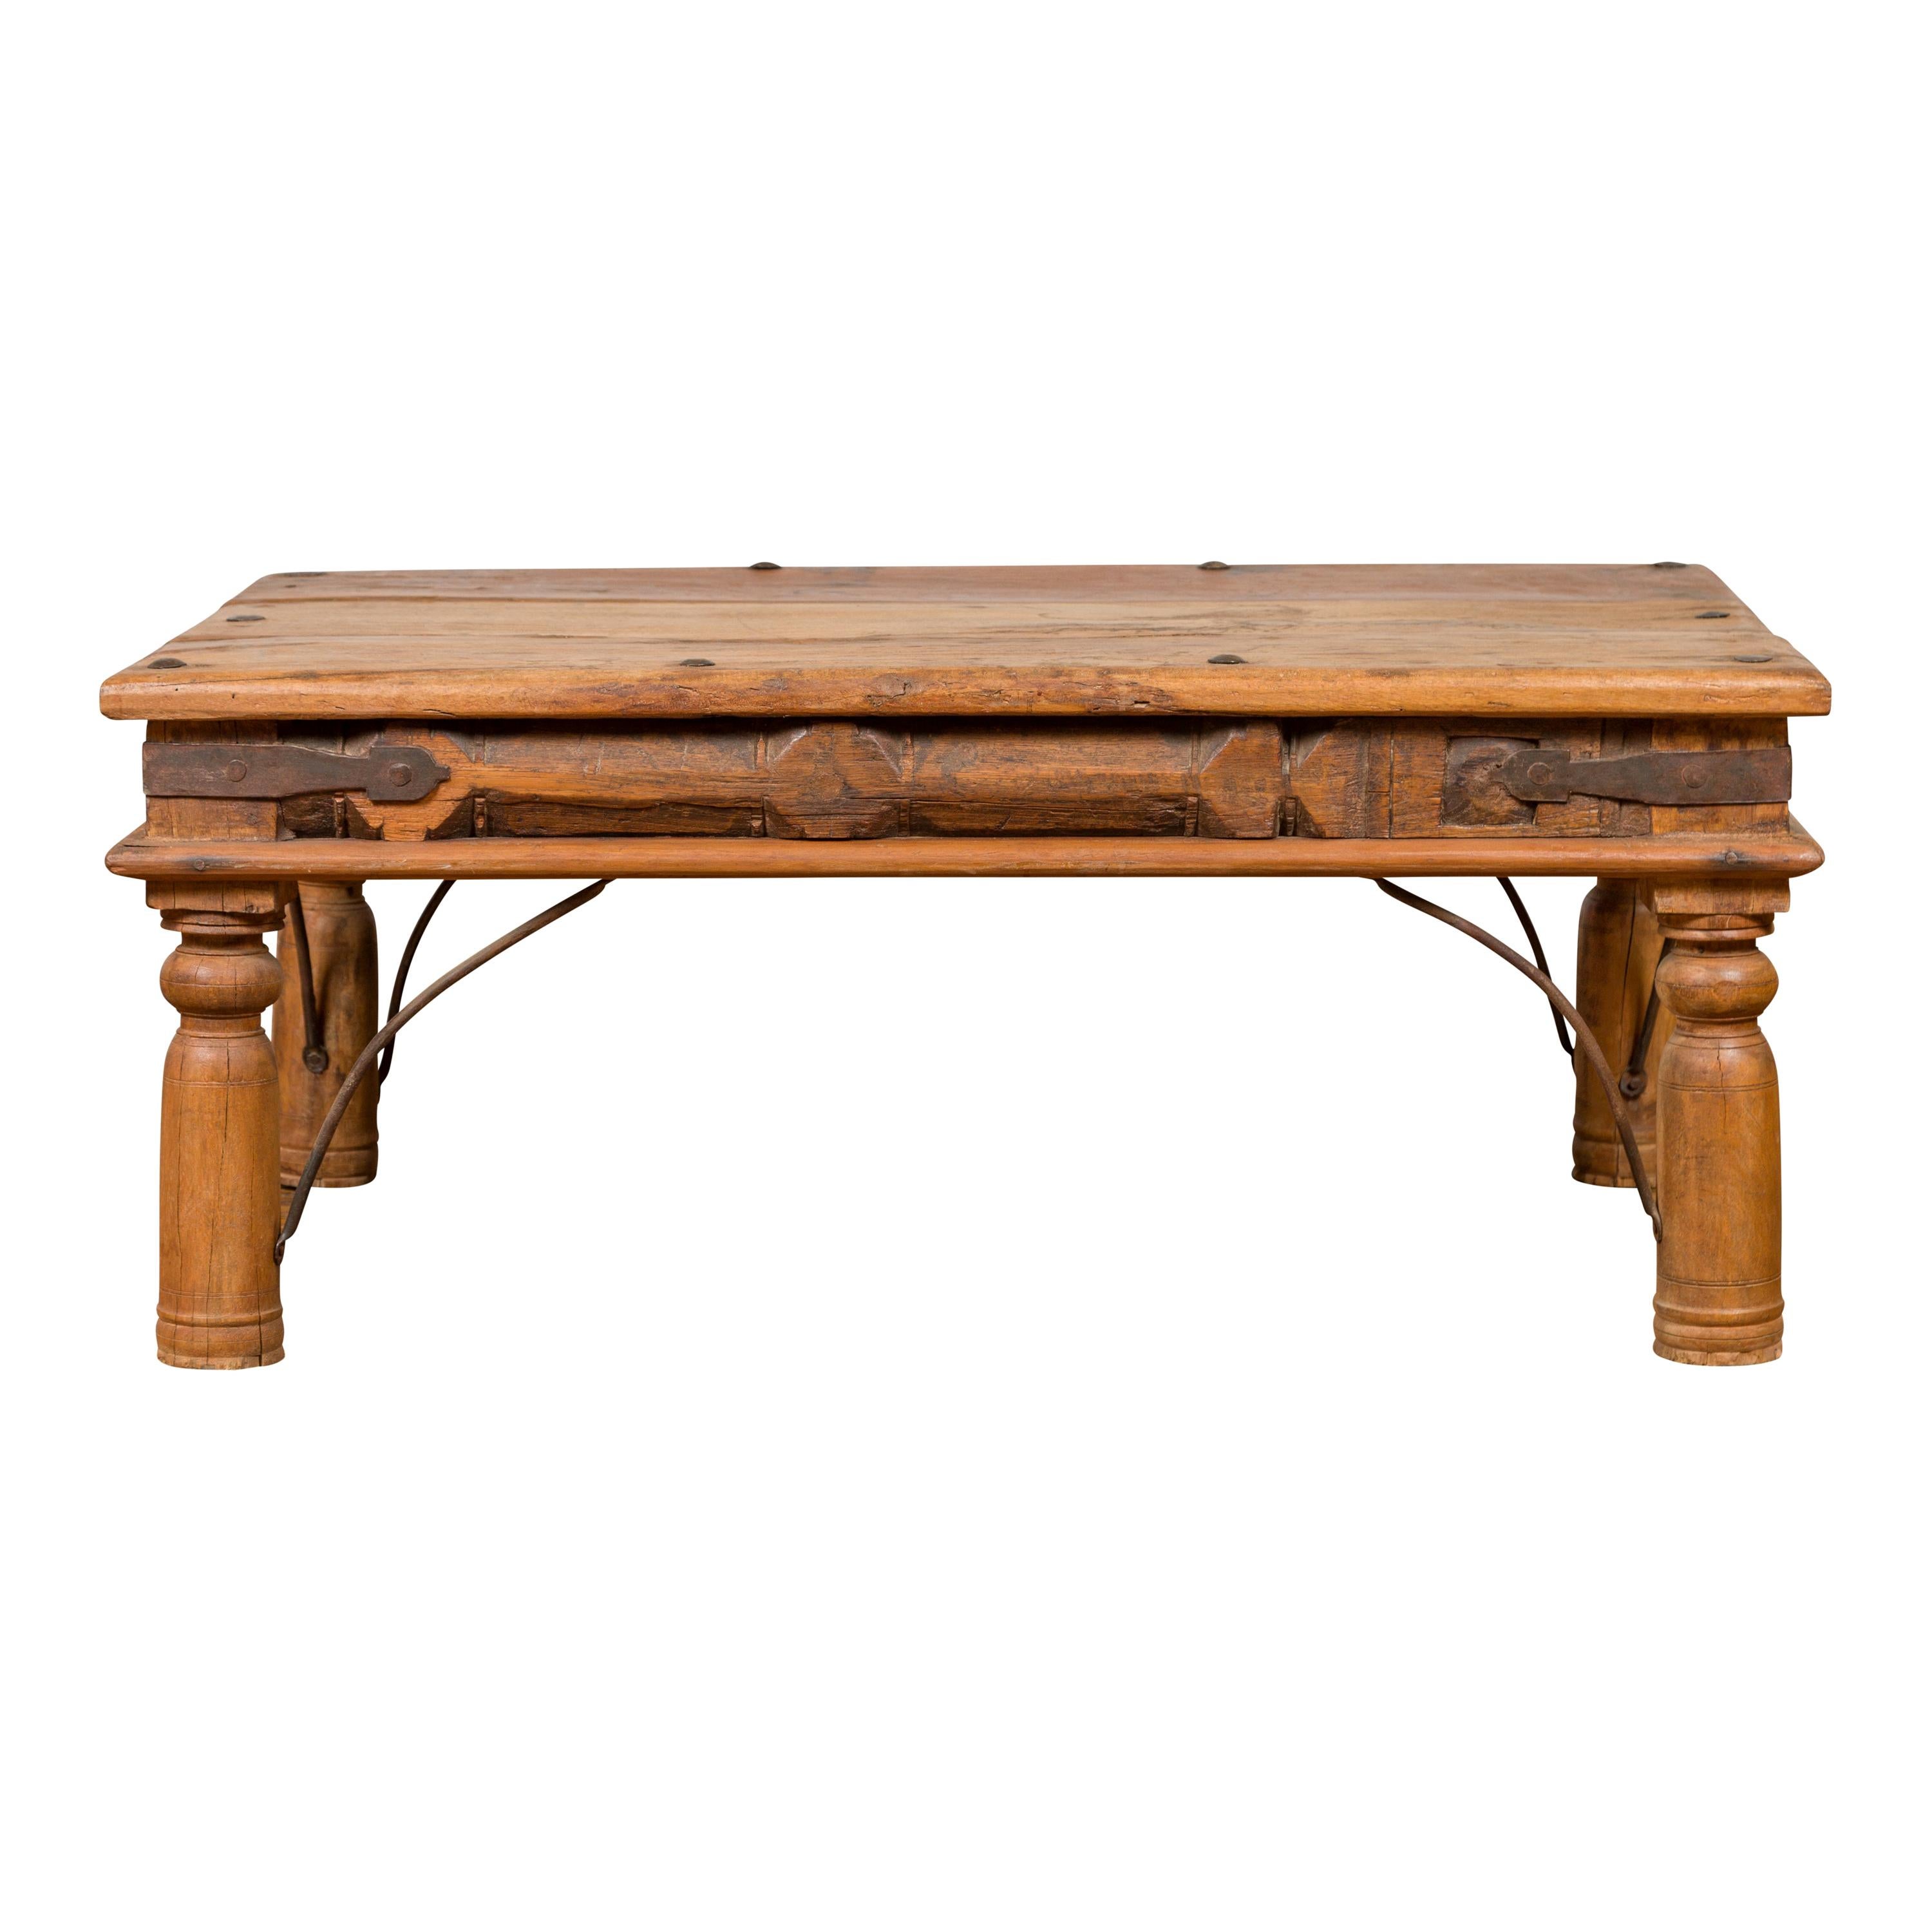 Rustic Indian Sheesham Wood Coffee Table with Nailhead Design and Baluster Legs